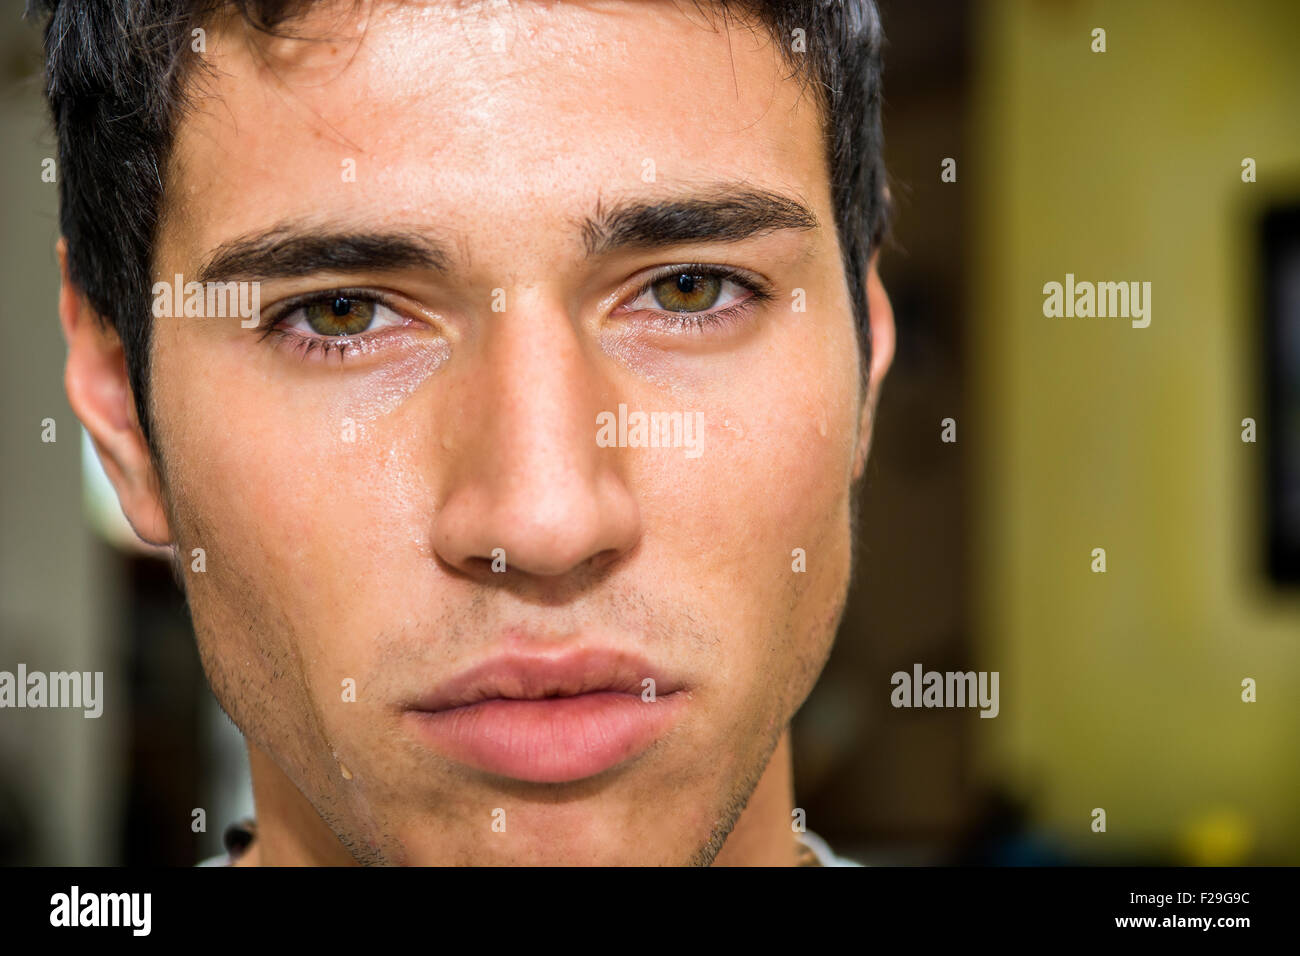 Close up Face of a Pensive Handsome Young Man with Tears on his Face, Looking at Camera, Worried or Sad. Stock Photo